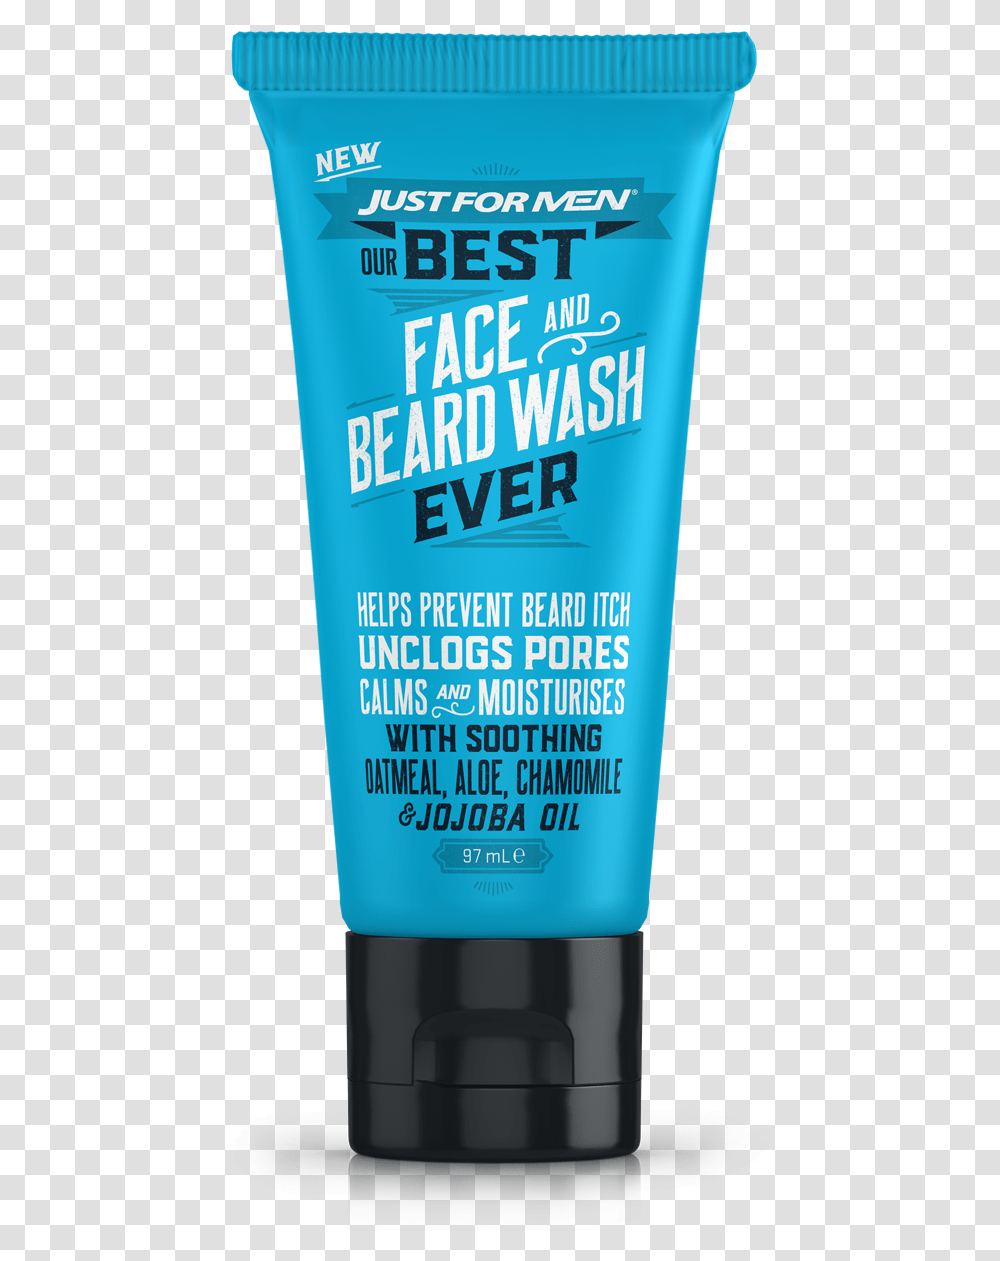 Just For Men Beard And Face Wash, Bottle, Sunscreen, Cosmetics, Lotion Transparent Png